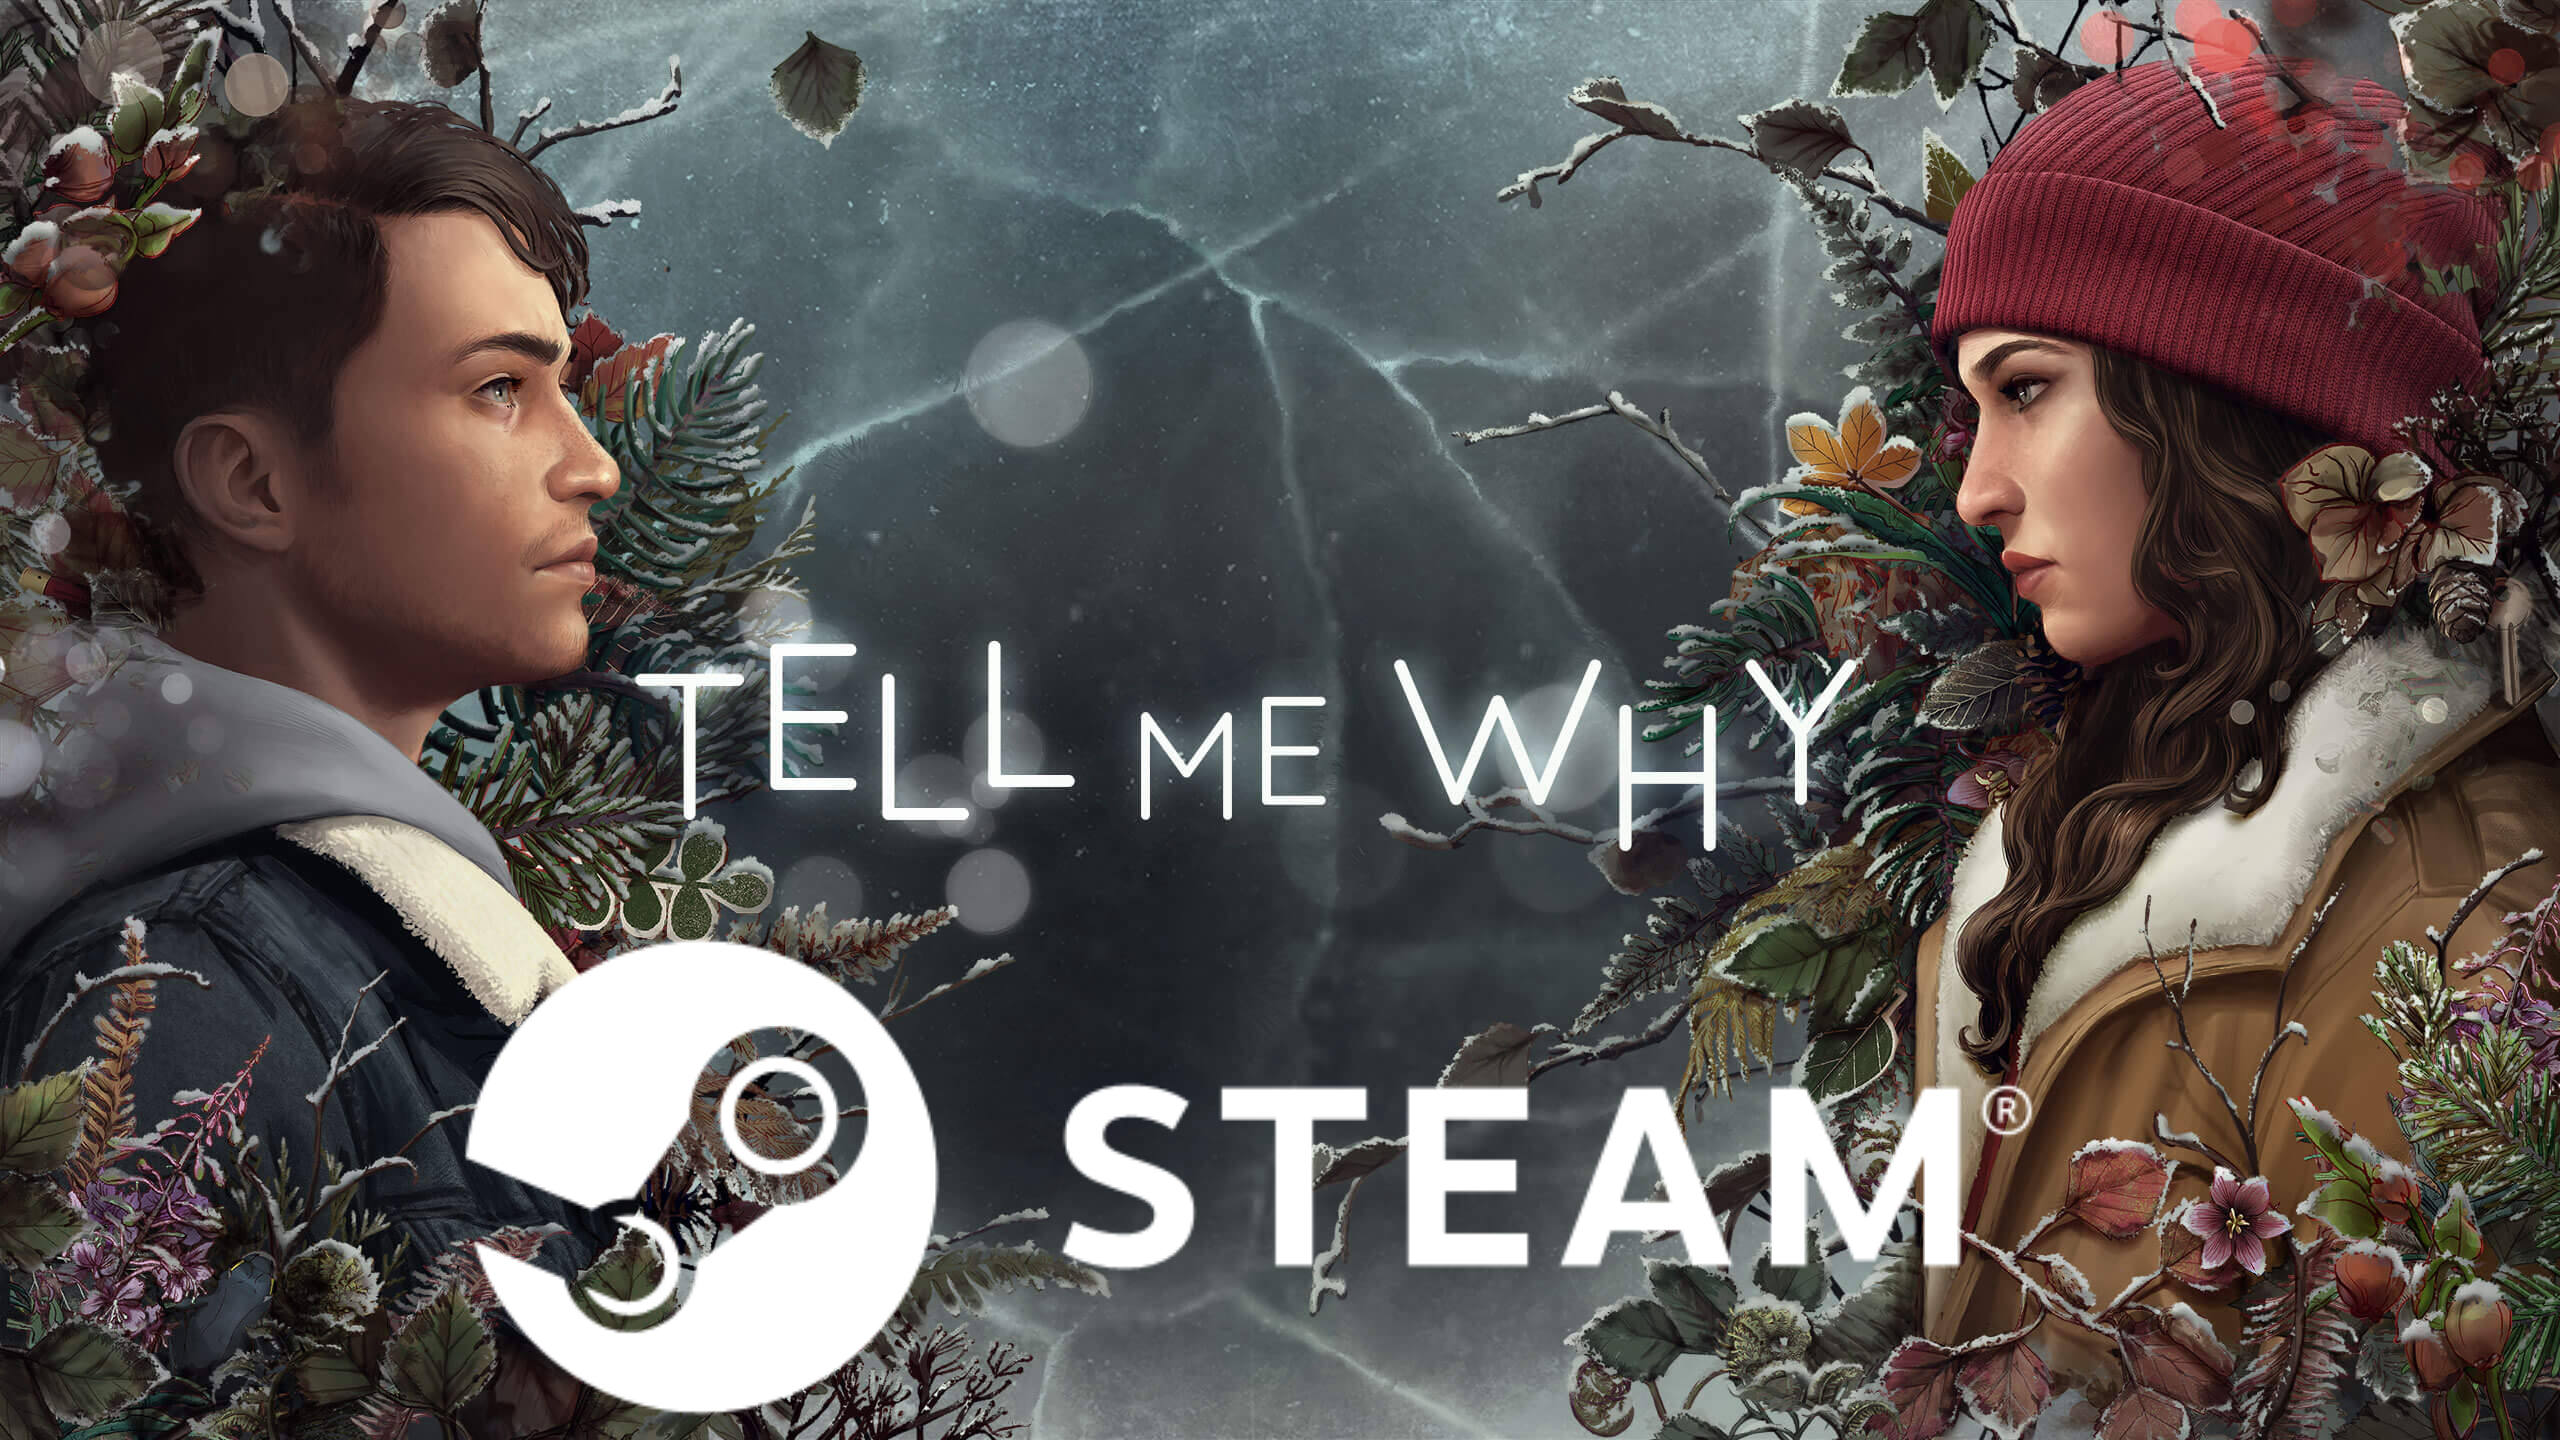 Tell me why to do. Tell me why (игра). Tell me why обложка. Tell me why Steam. Tell me why игра любовные линии.